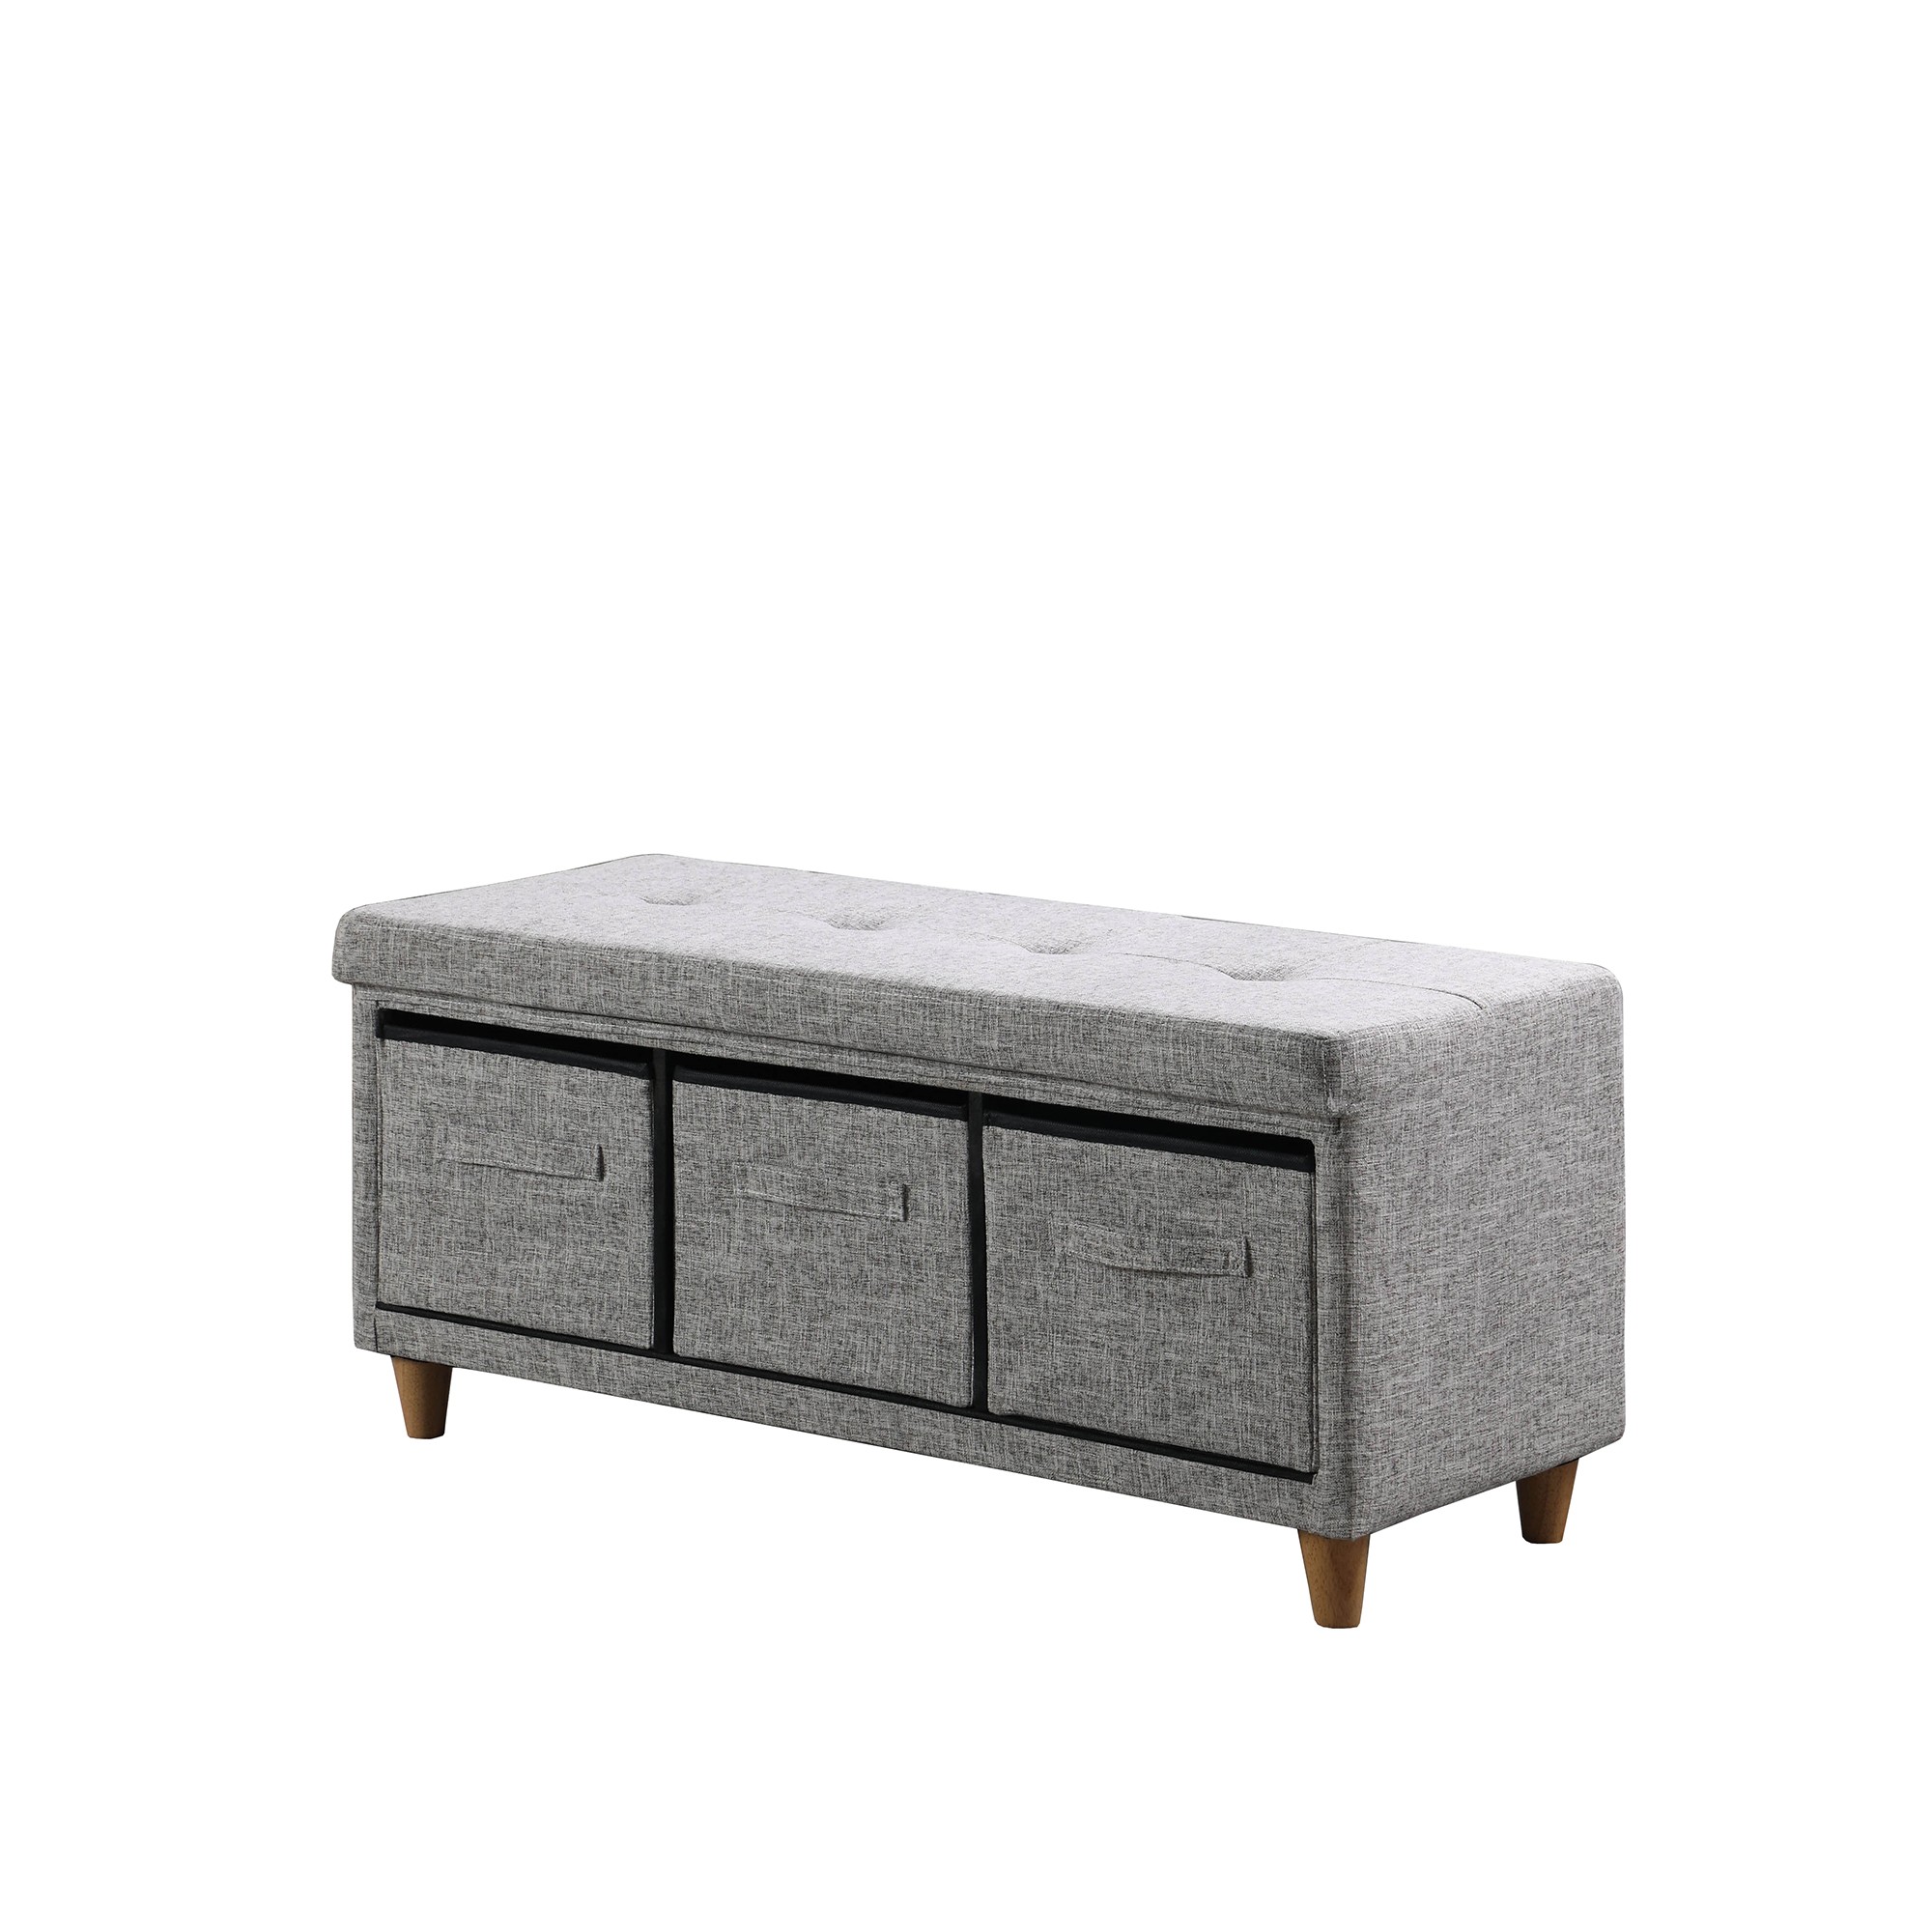 Gray Tufted Storage Bench with Basket Drawers